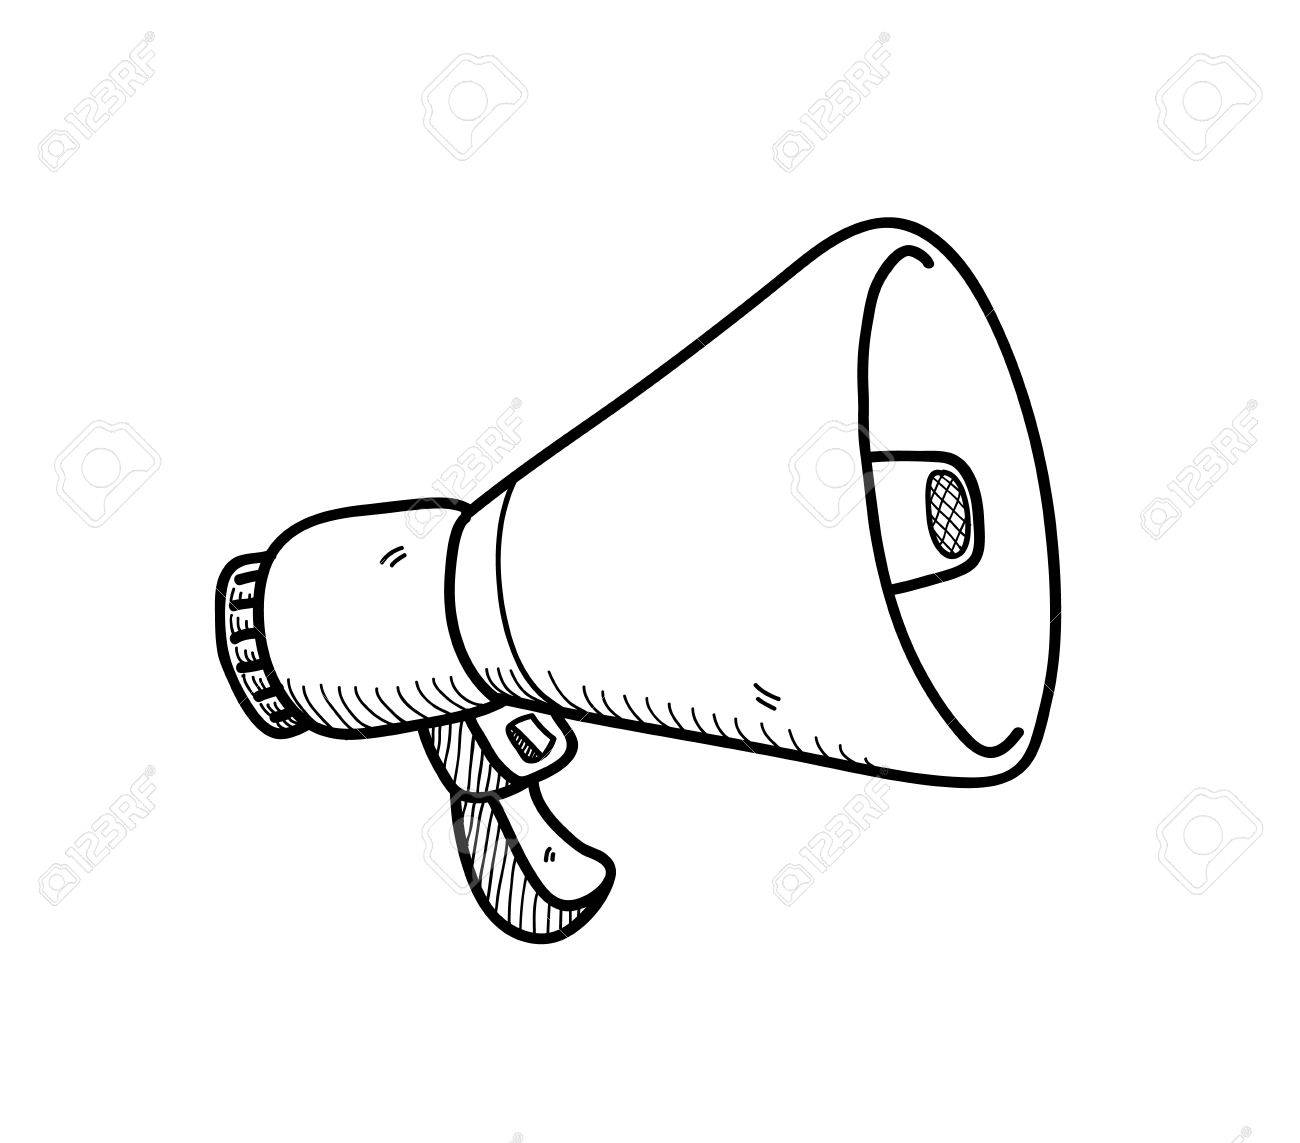 The best free Megaphone drawing images. Download from 138 free drawings